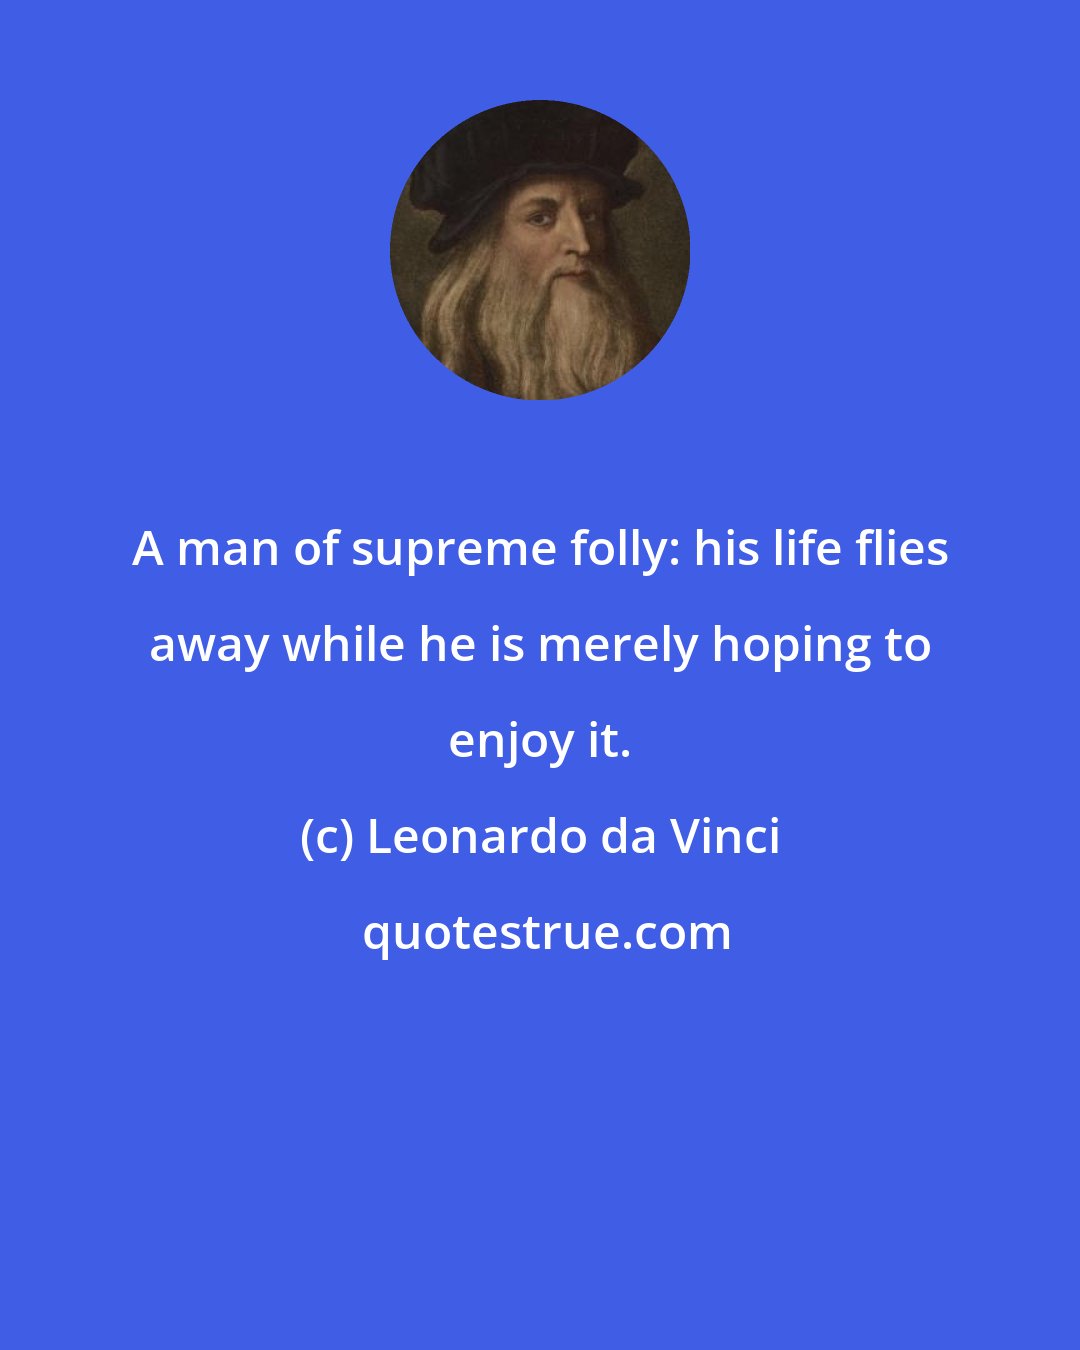 Leonardo da Vinci: A man of supreme folly: his life flies away while he is merely hoping to enjoy it.